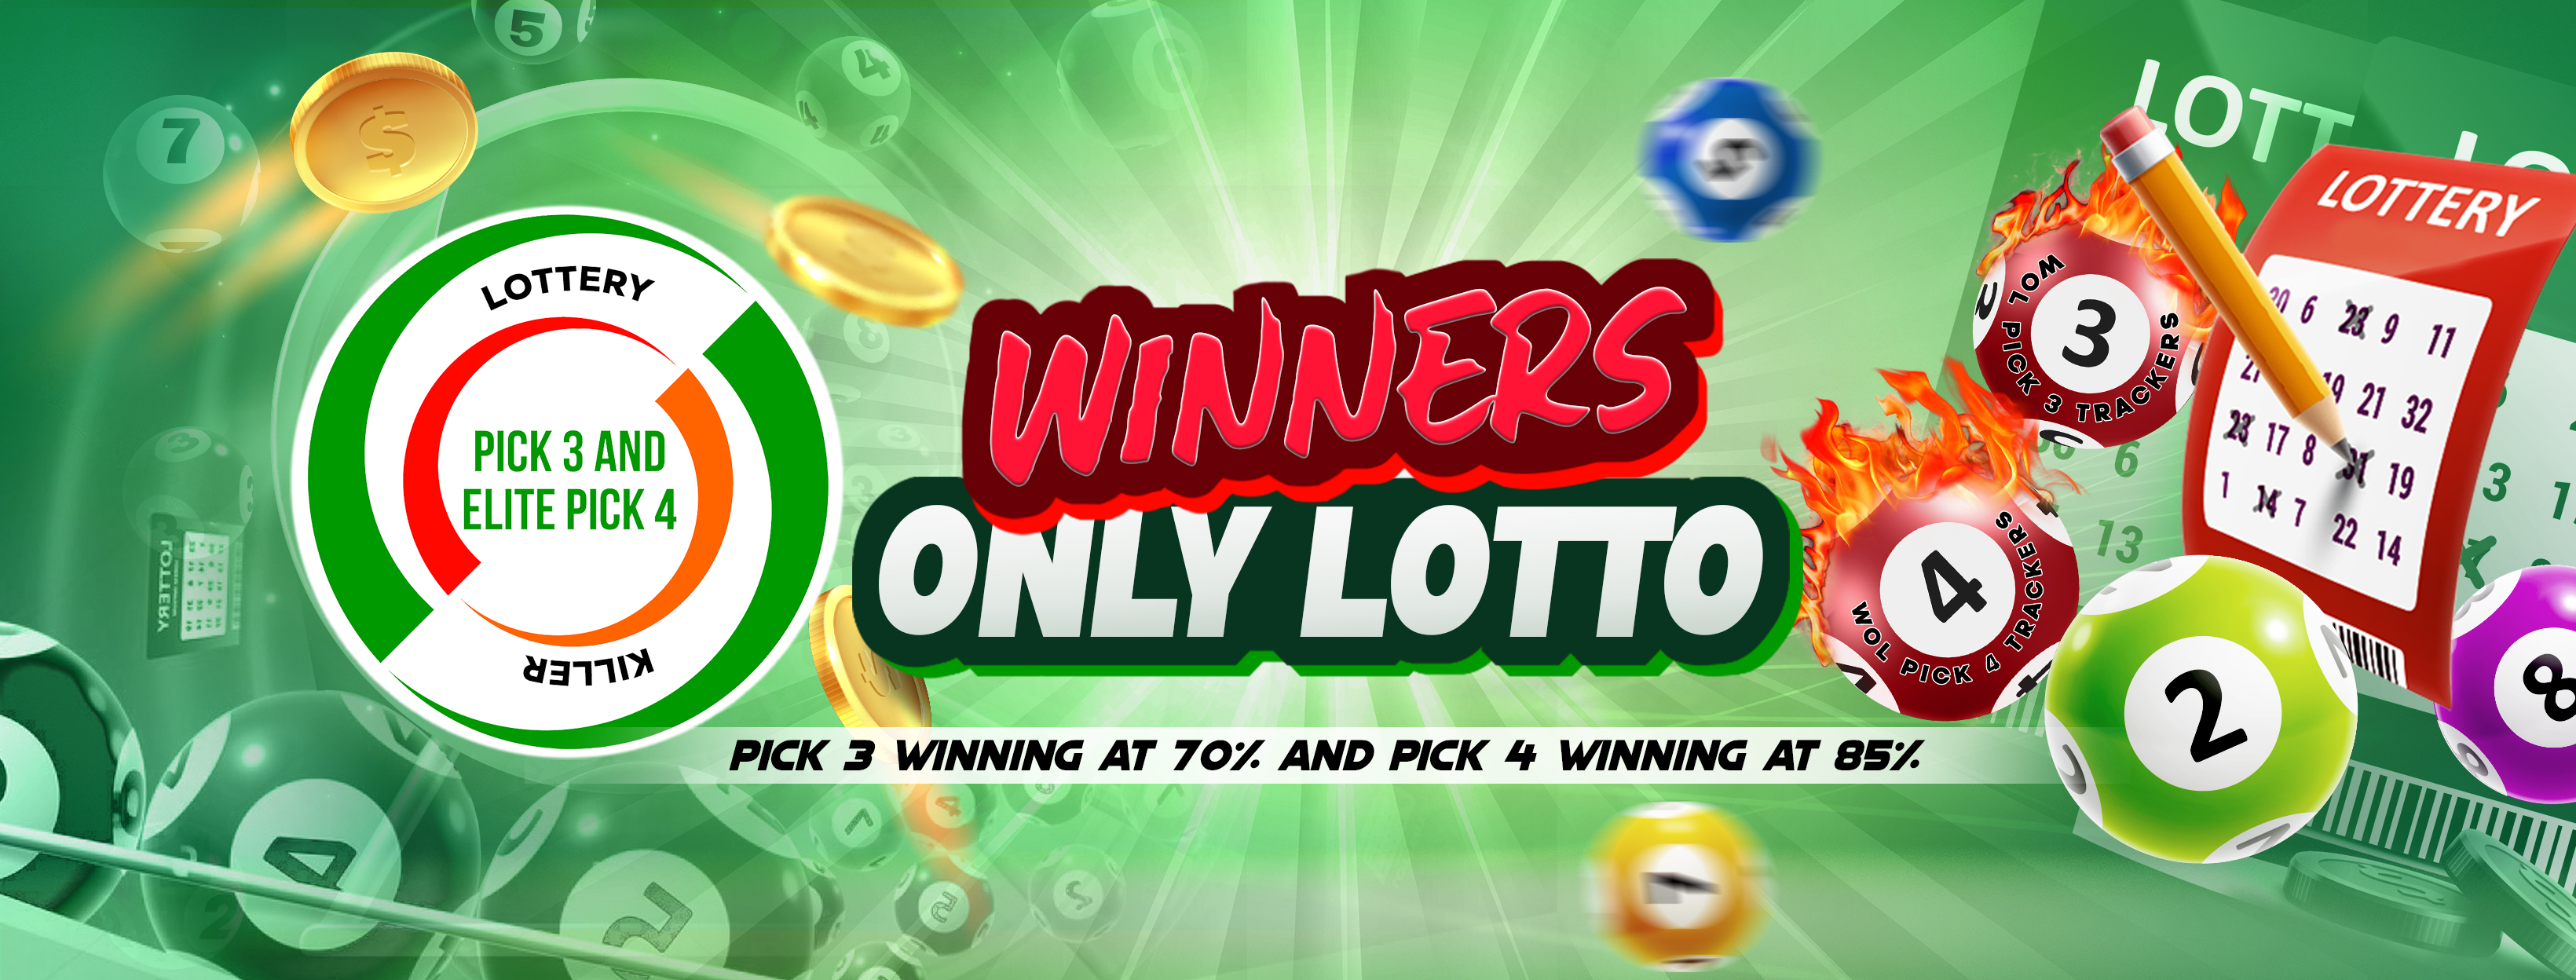 Winners Only Lotto Affiliates